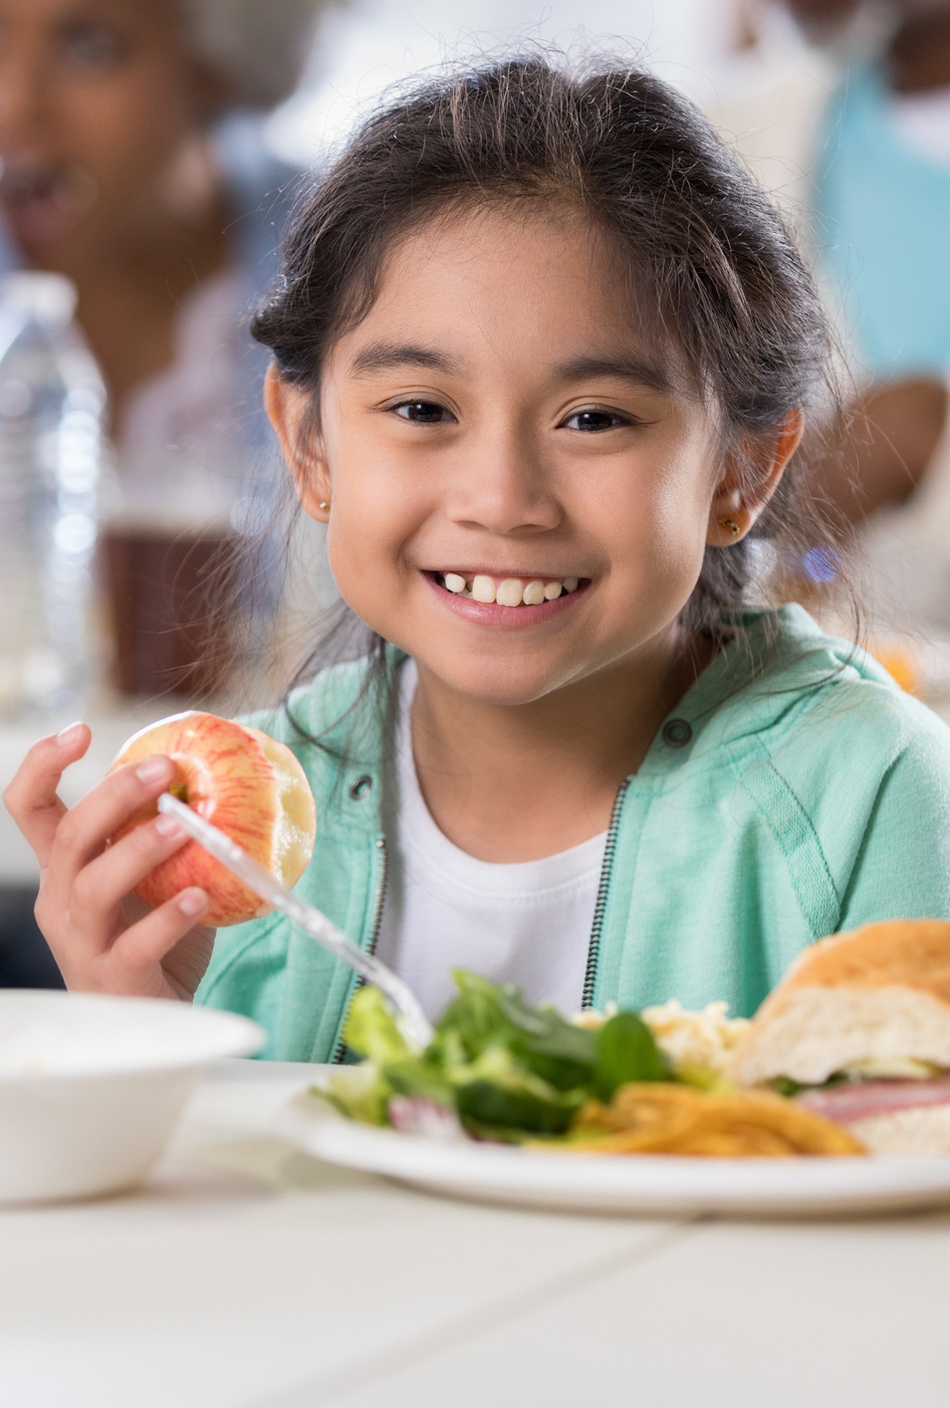 Lack of Food Can Affect a Child's Learning Abilities